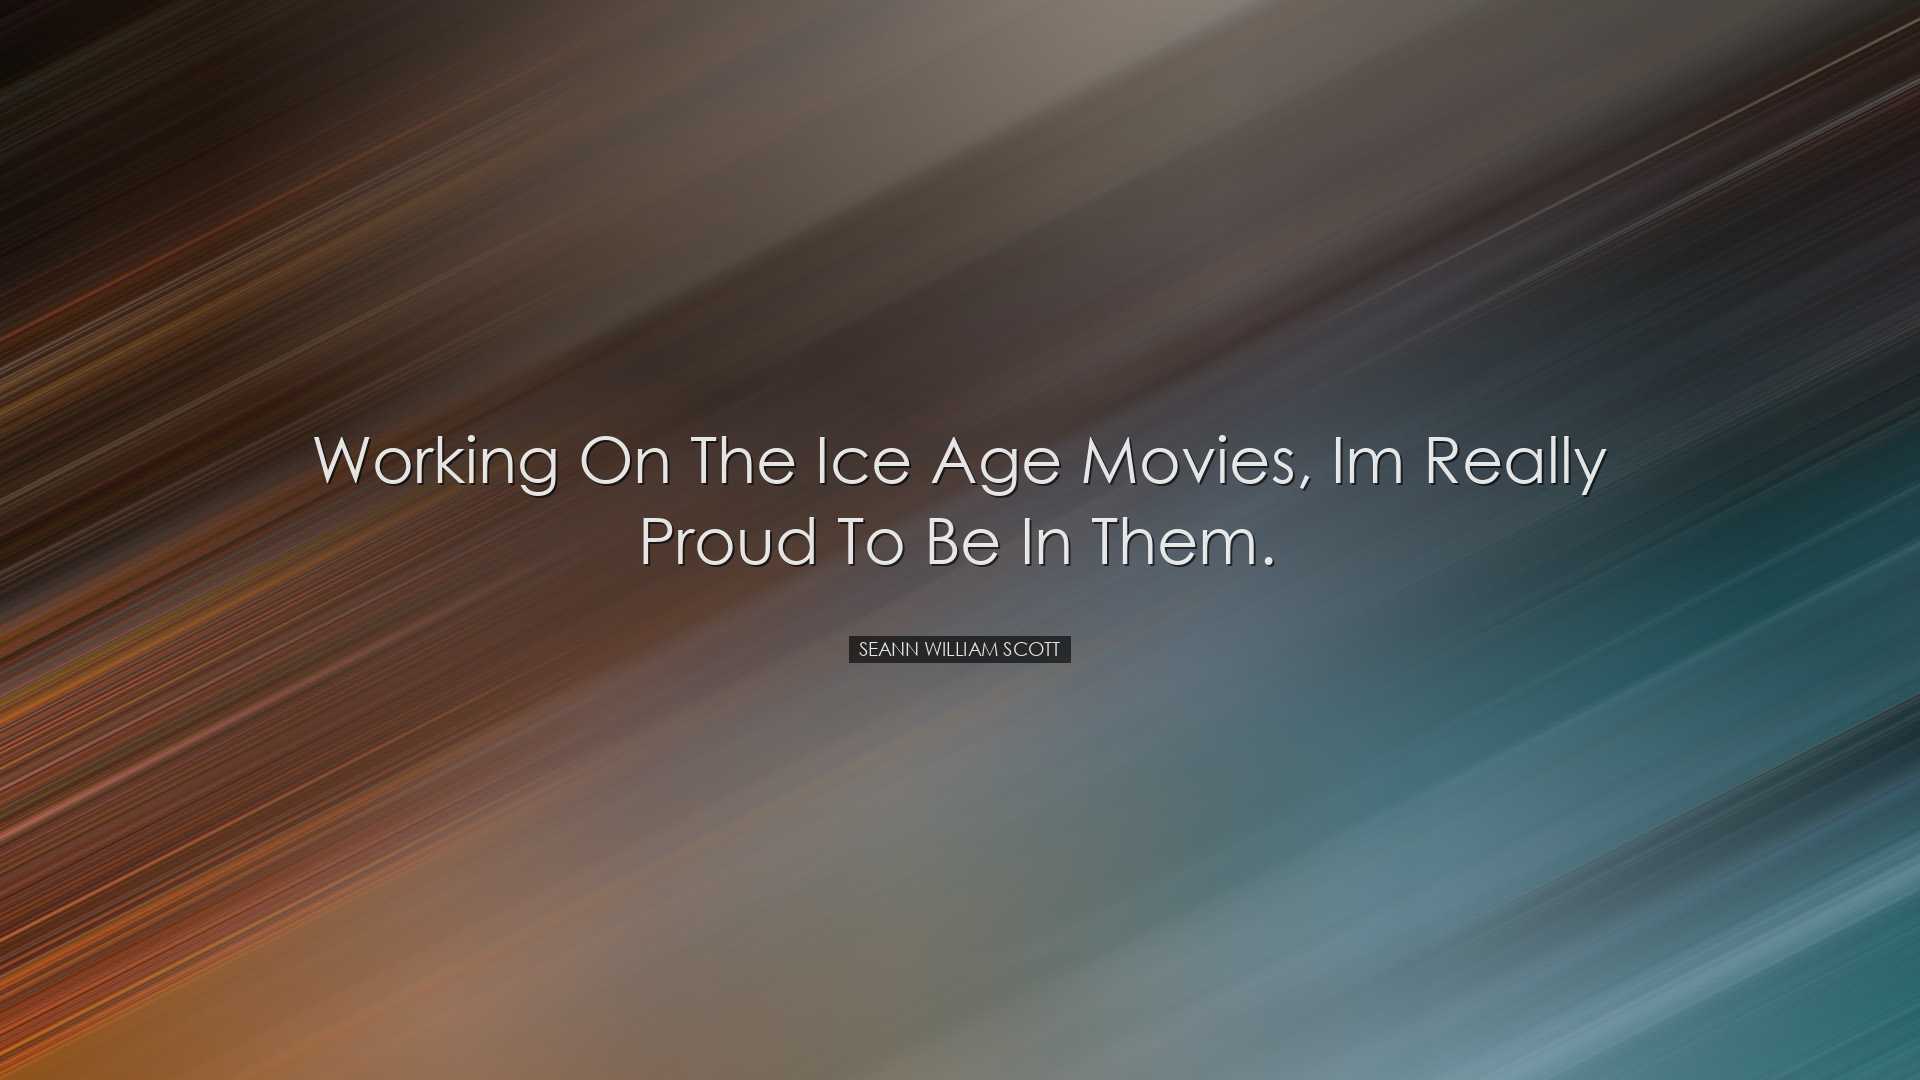 Working on the Ice Age movies, Im really proud to be in them. - Se